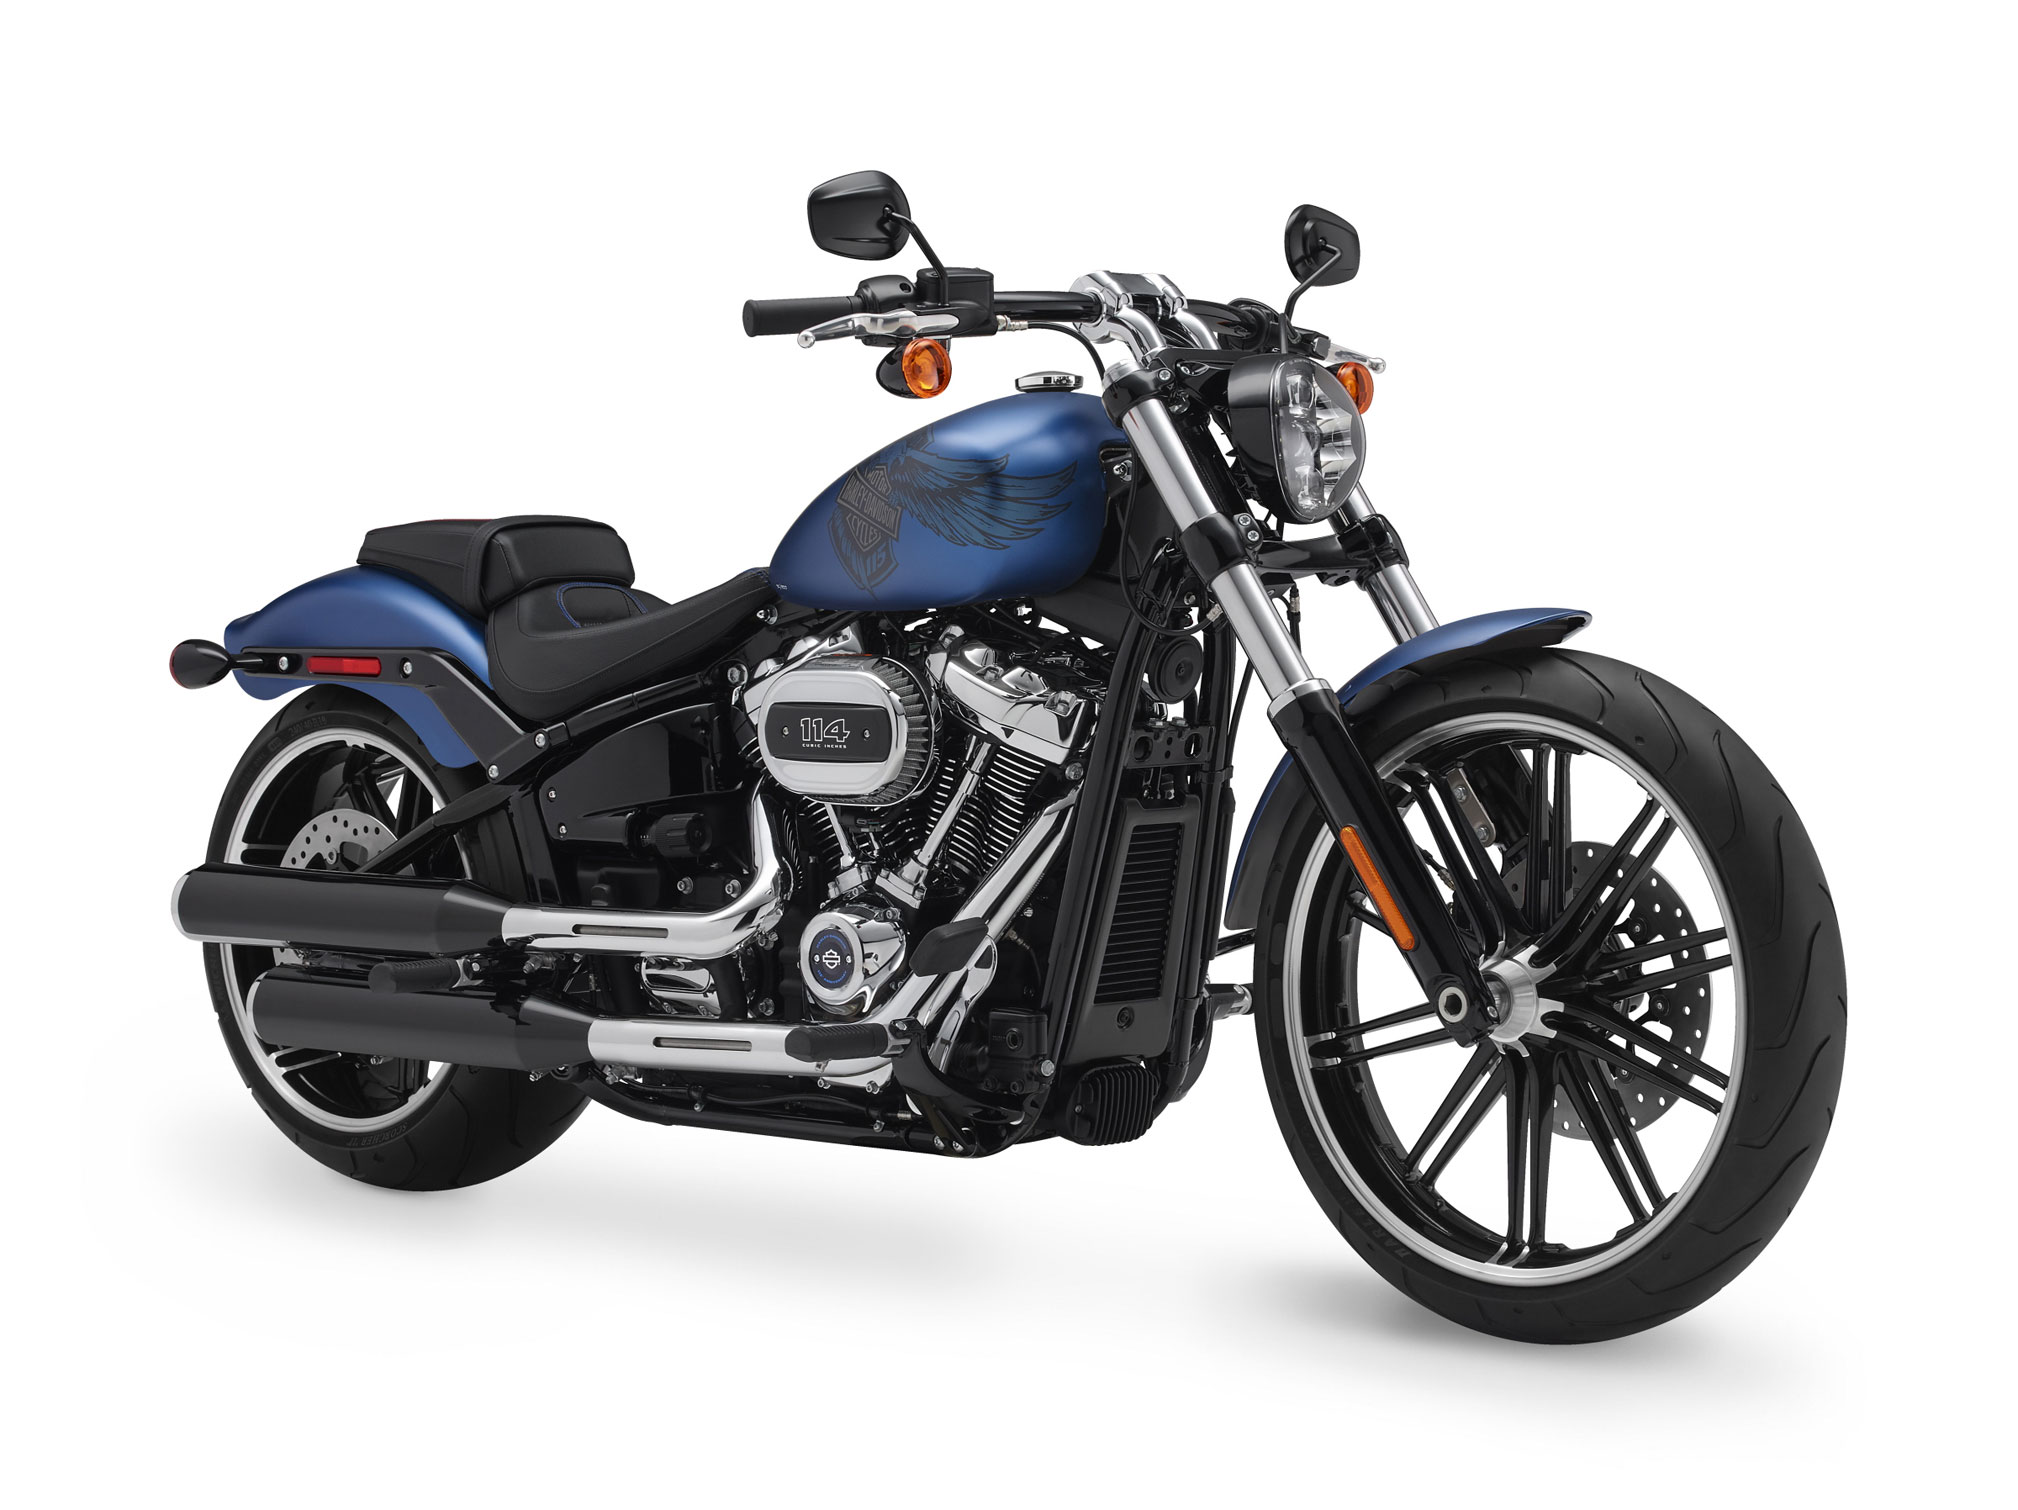 2018 Harley Davidson Breakout 114 115th Anniversary Review Total Motorcycle